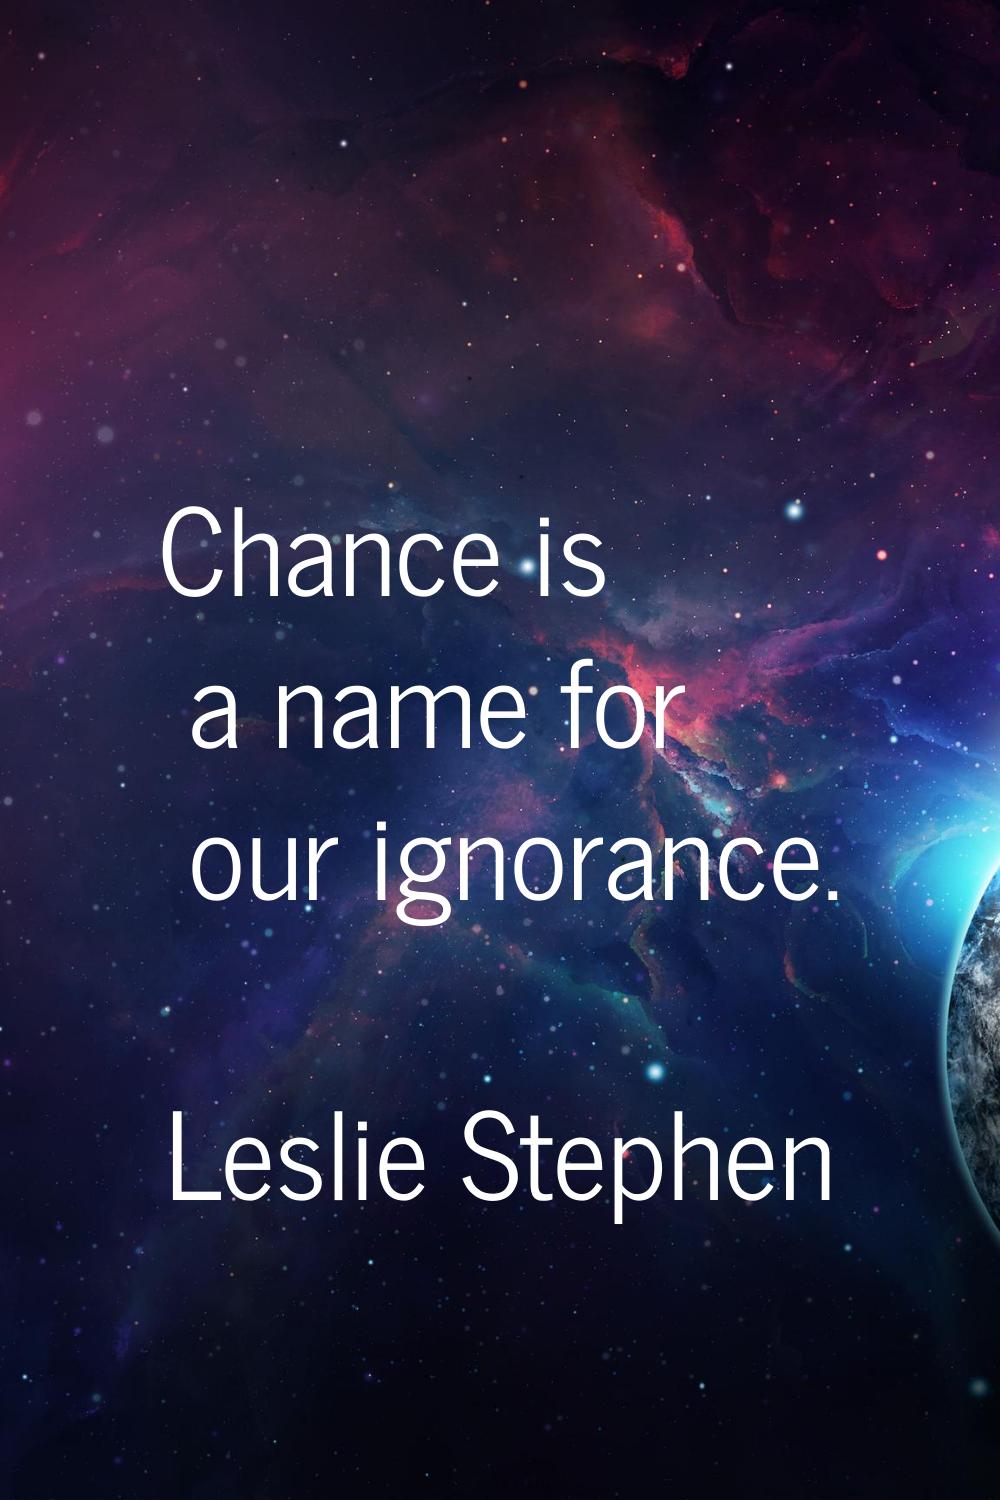 Chance is a name for our ignorance.